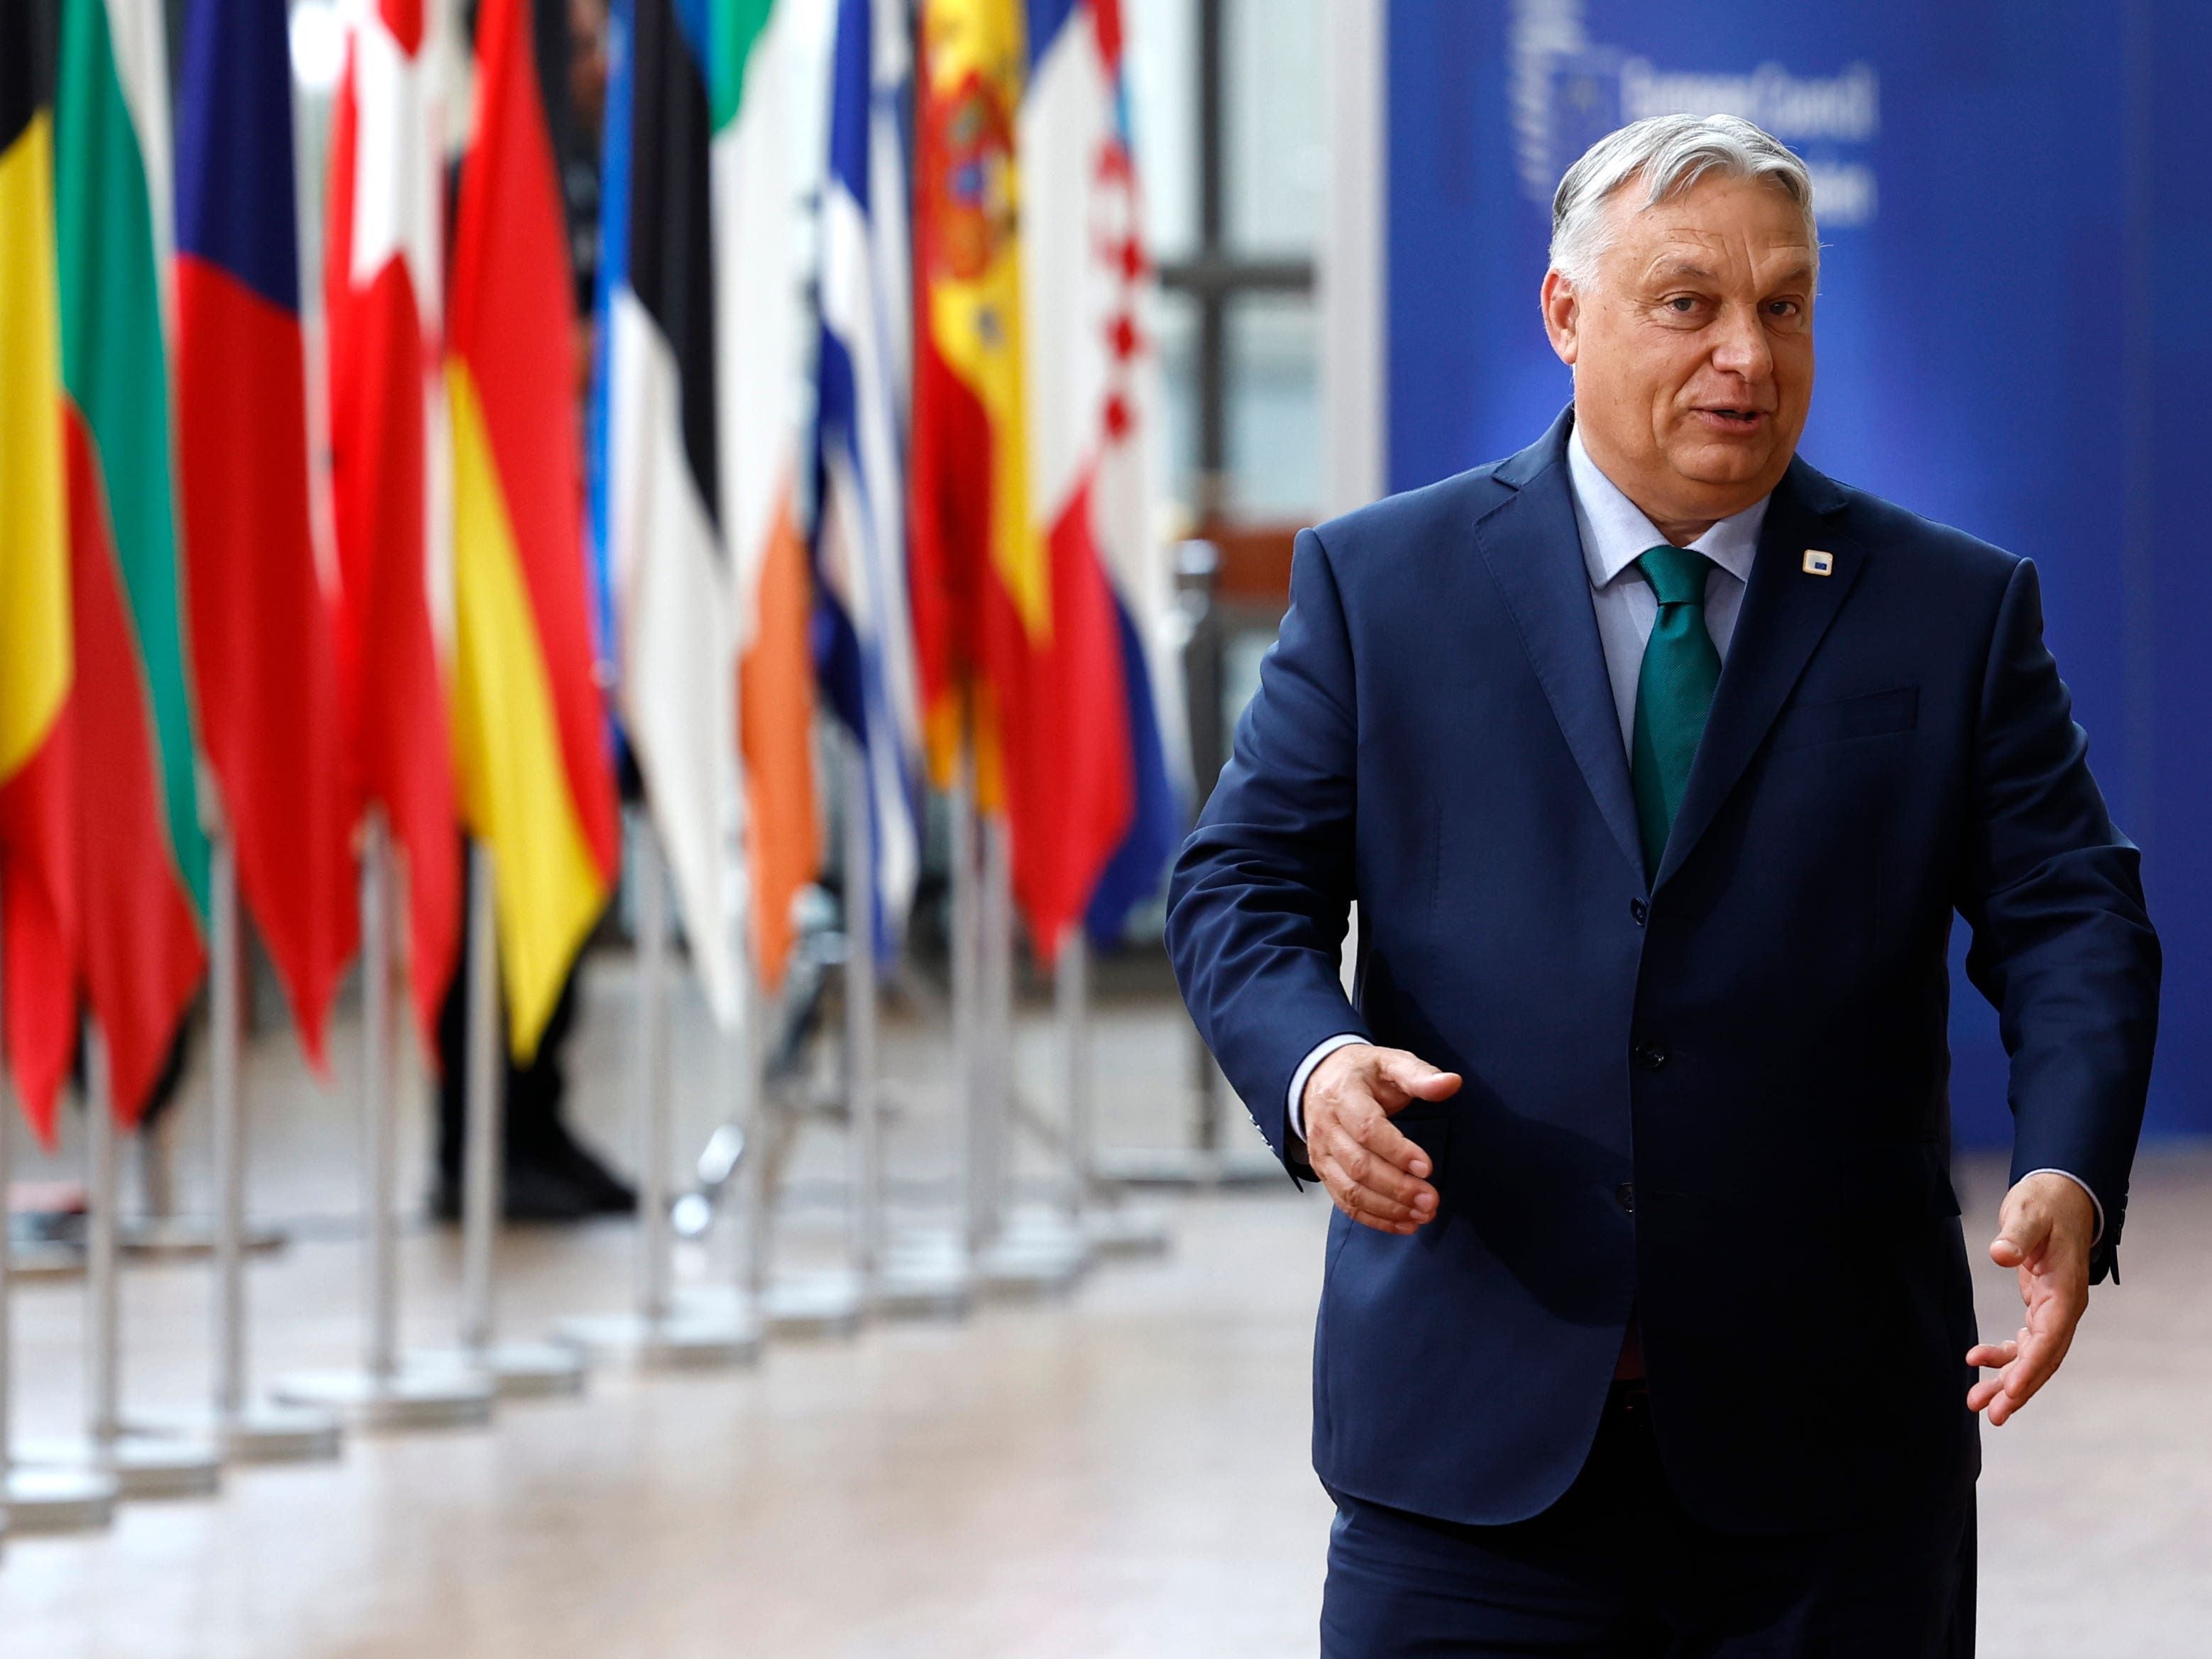 Hungary’s Orban presents new alliance with Austria and Czech nationalist parties